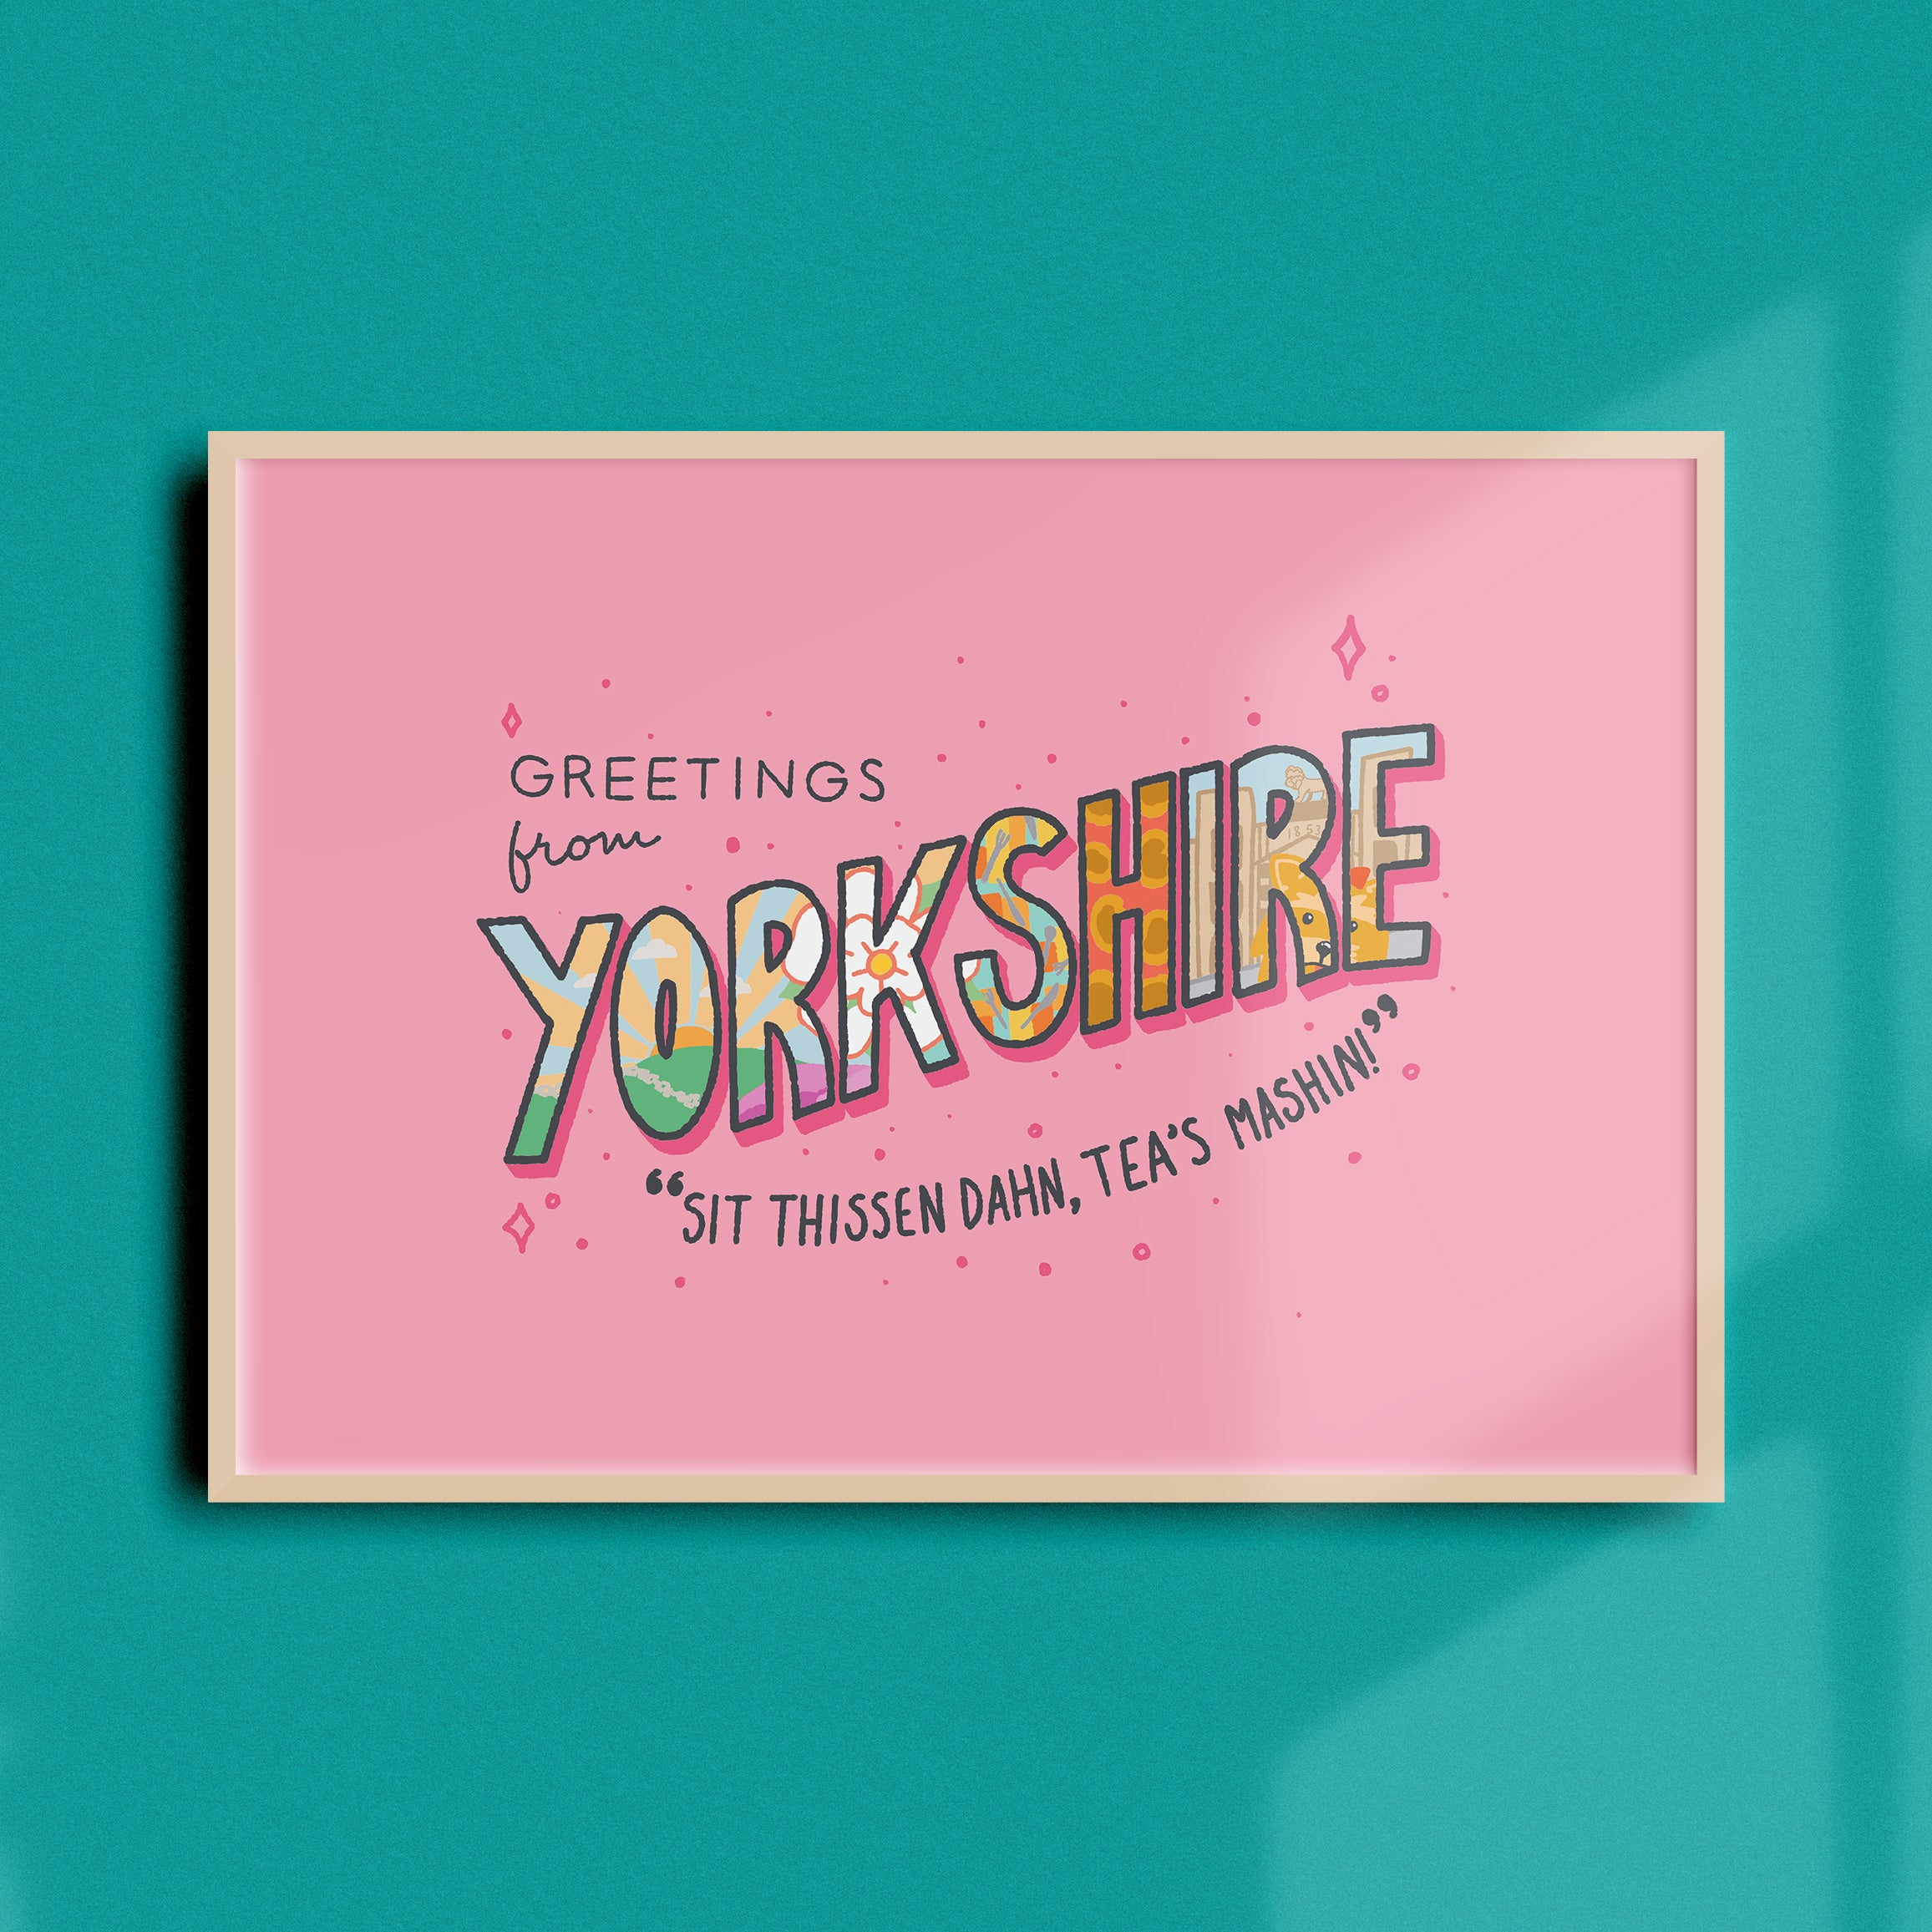 Greetings from Yorkshire A4 Print - Finest Imaginary